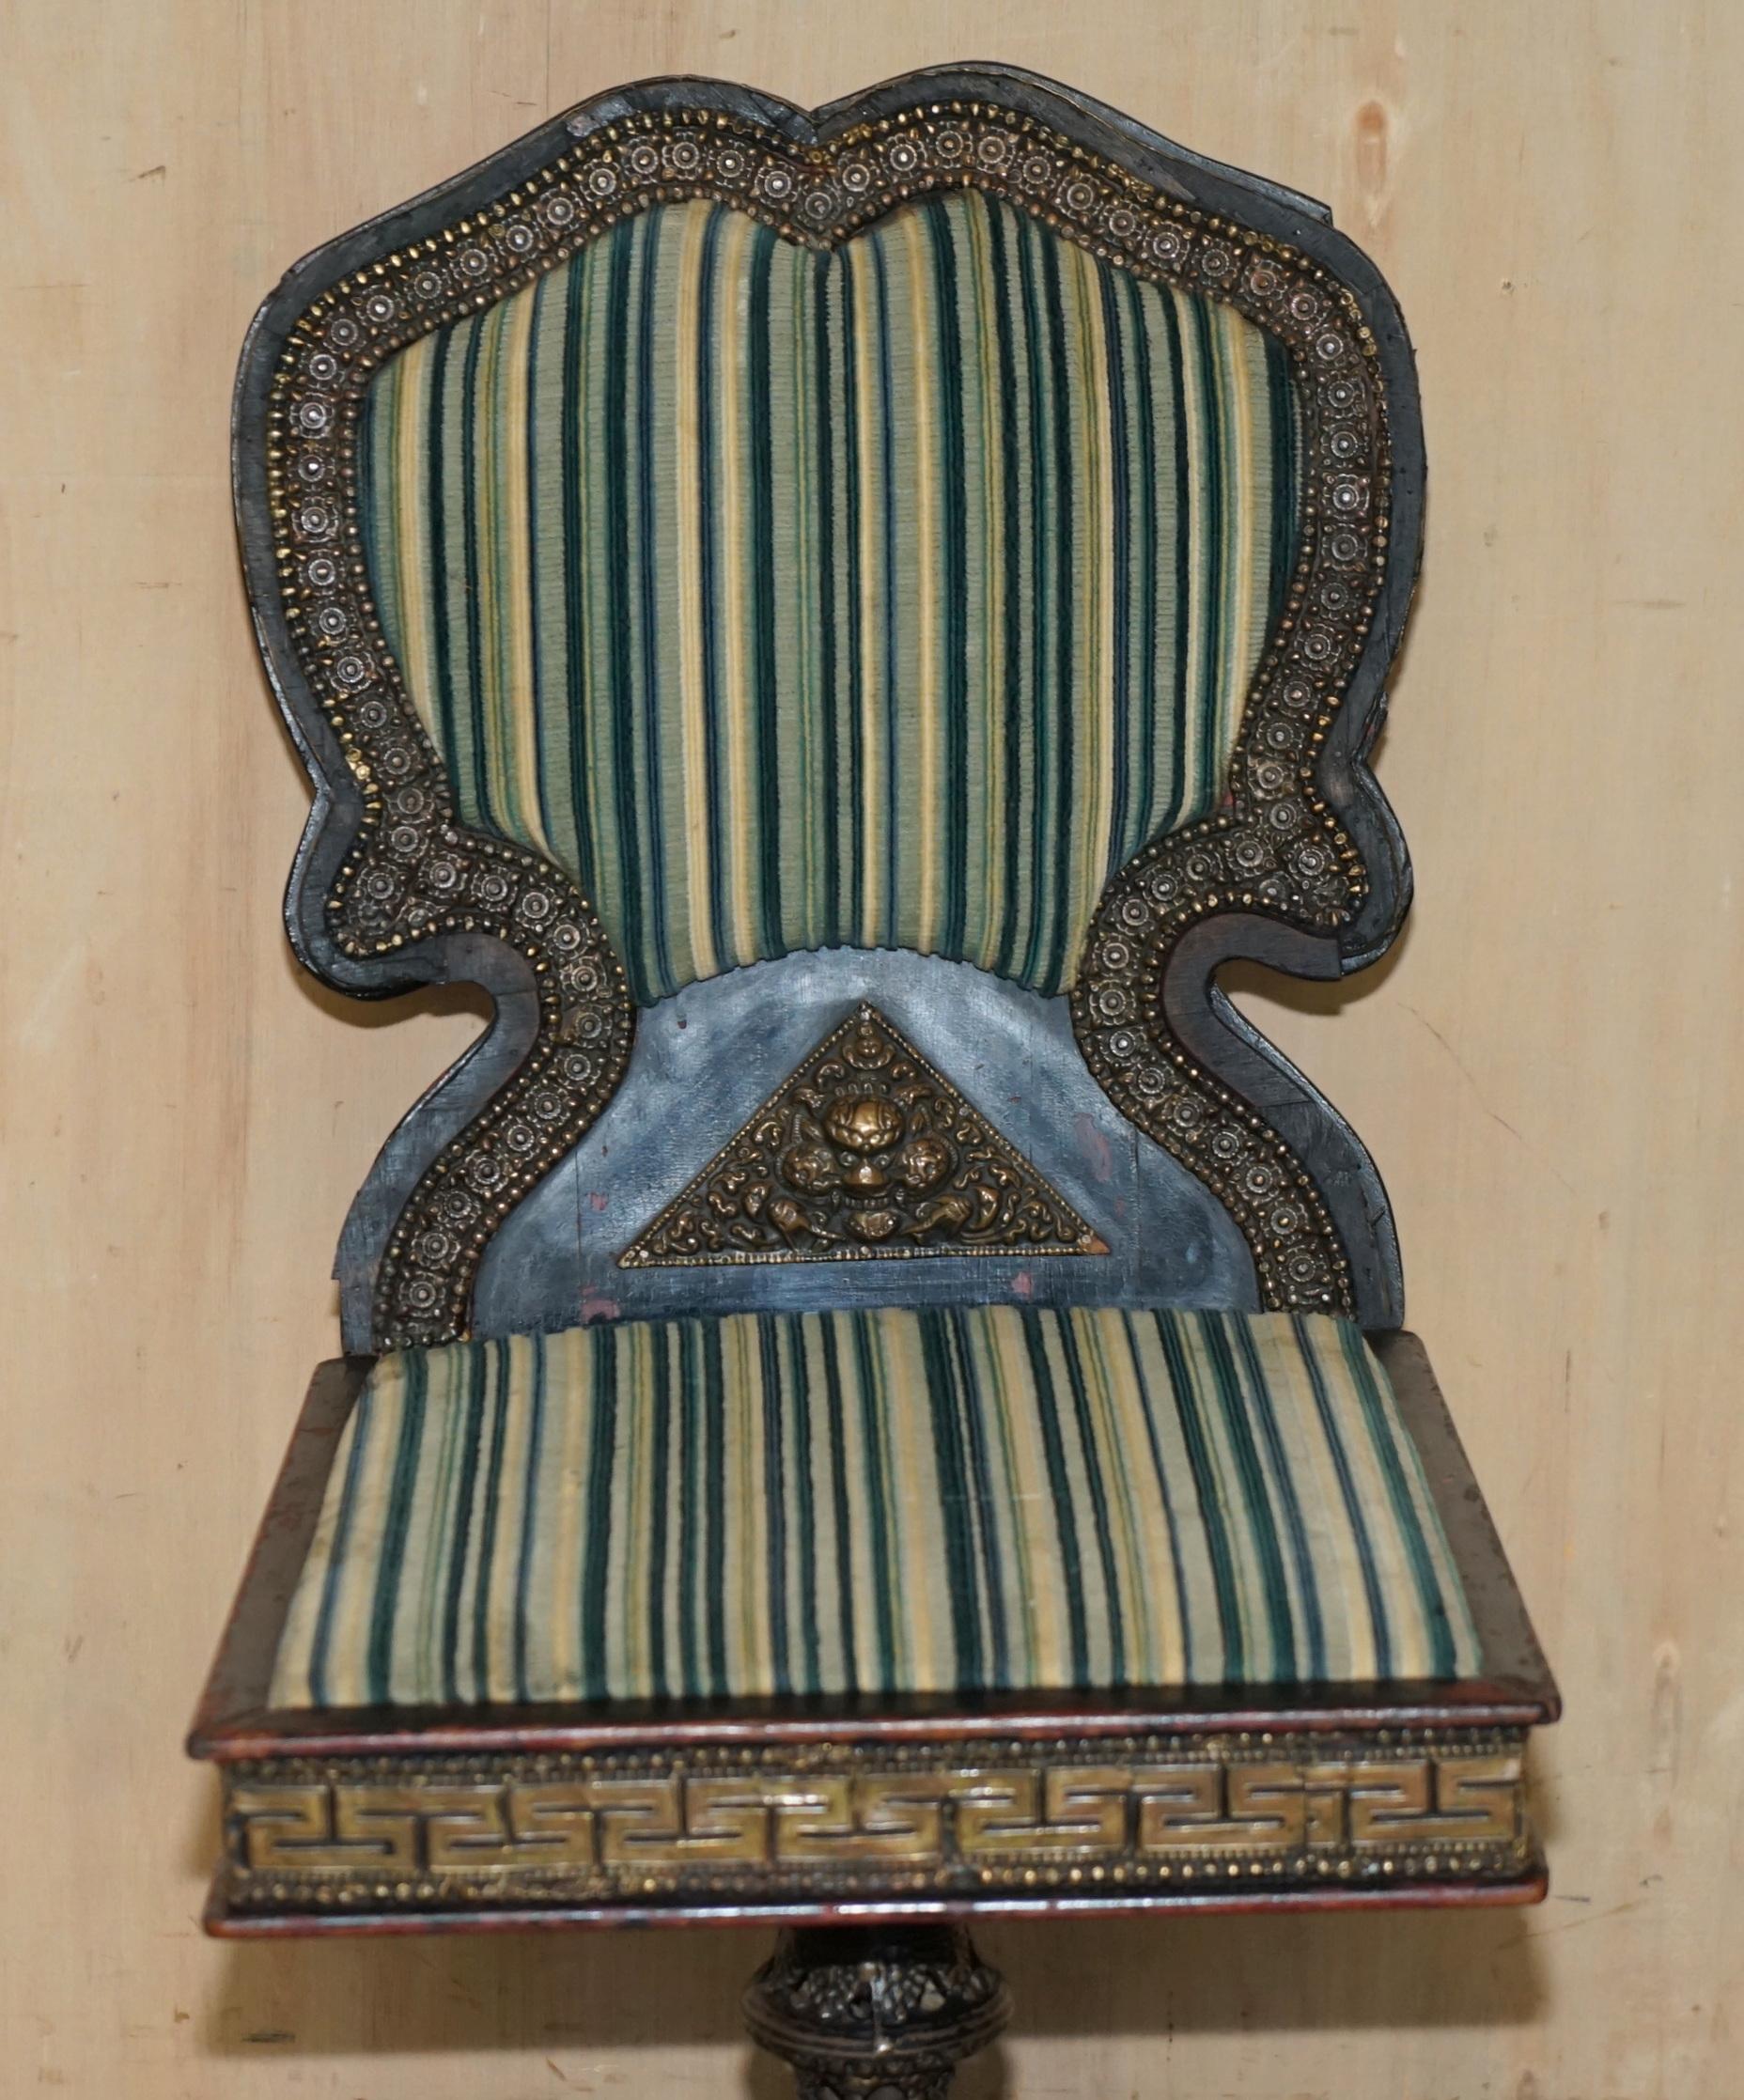 Chinoiserie VERY RARE ANTIQUE CiRCA 1880 REPOUSE CHINESE DRAGON GEM ENCRUSTED CAPTAINS CHAIR For Sale